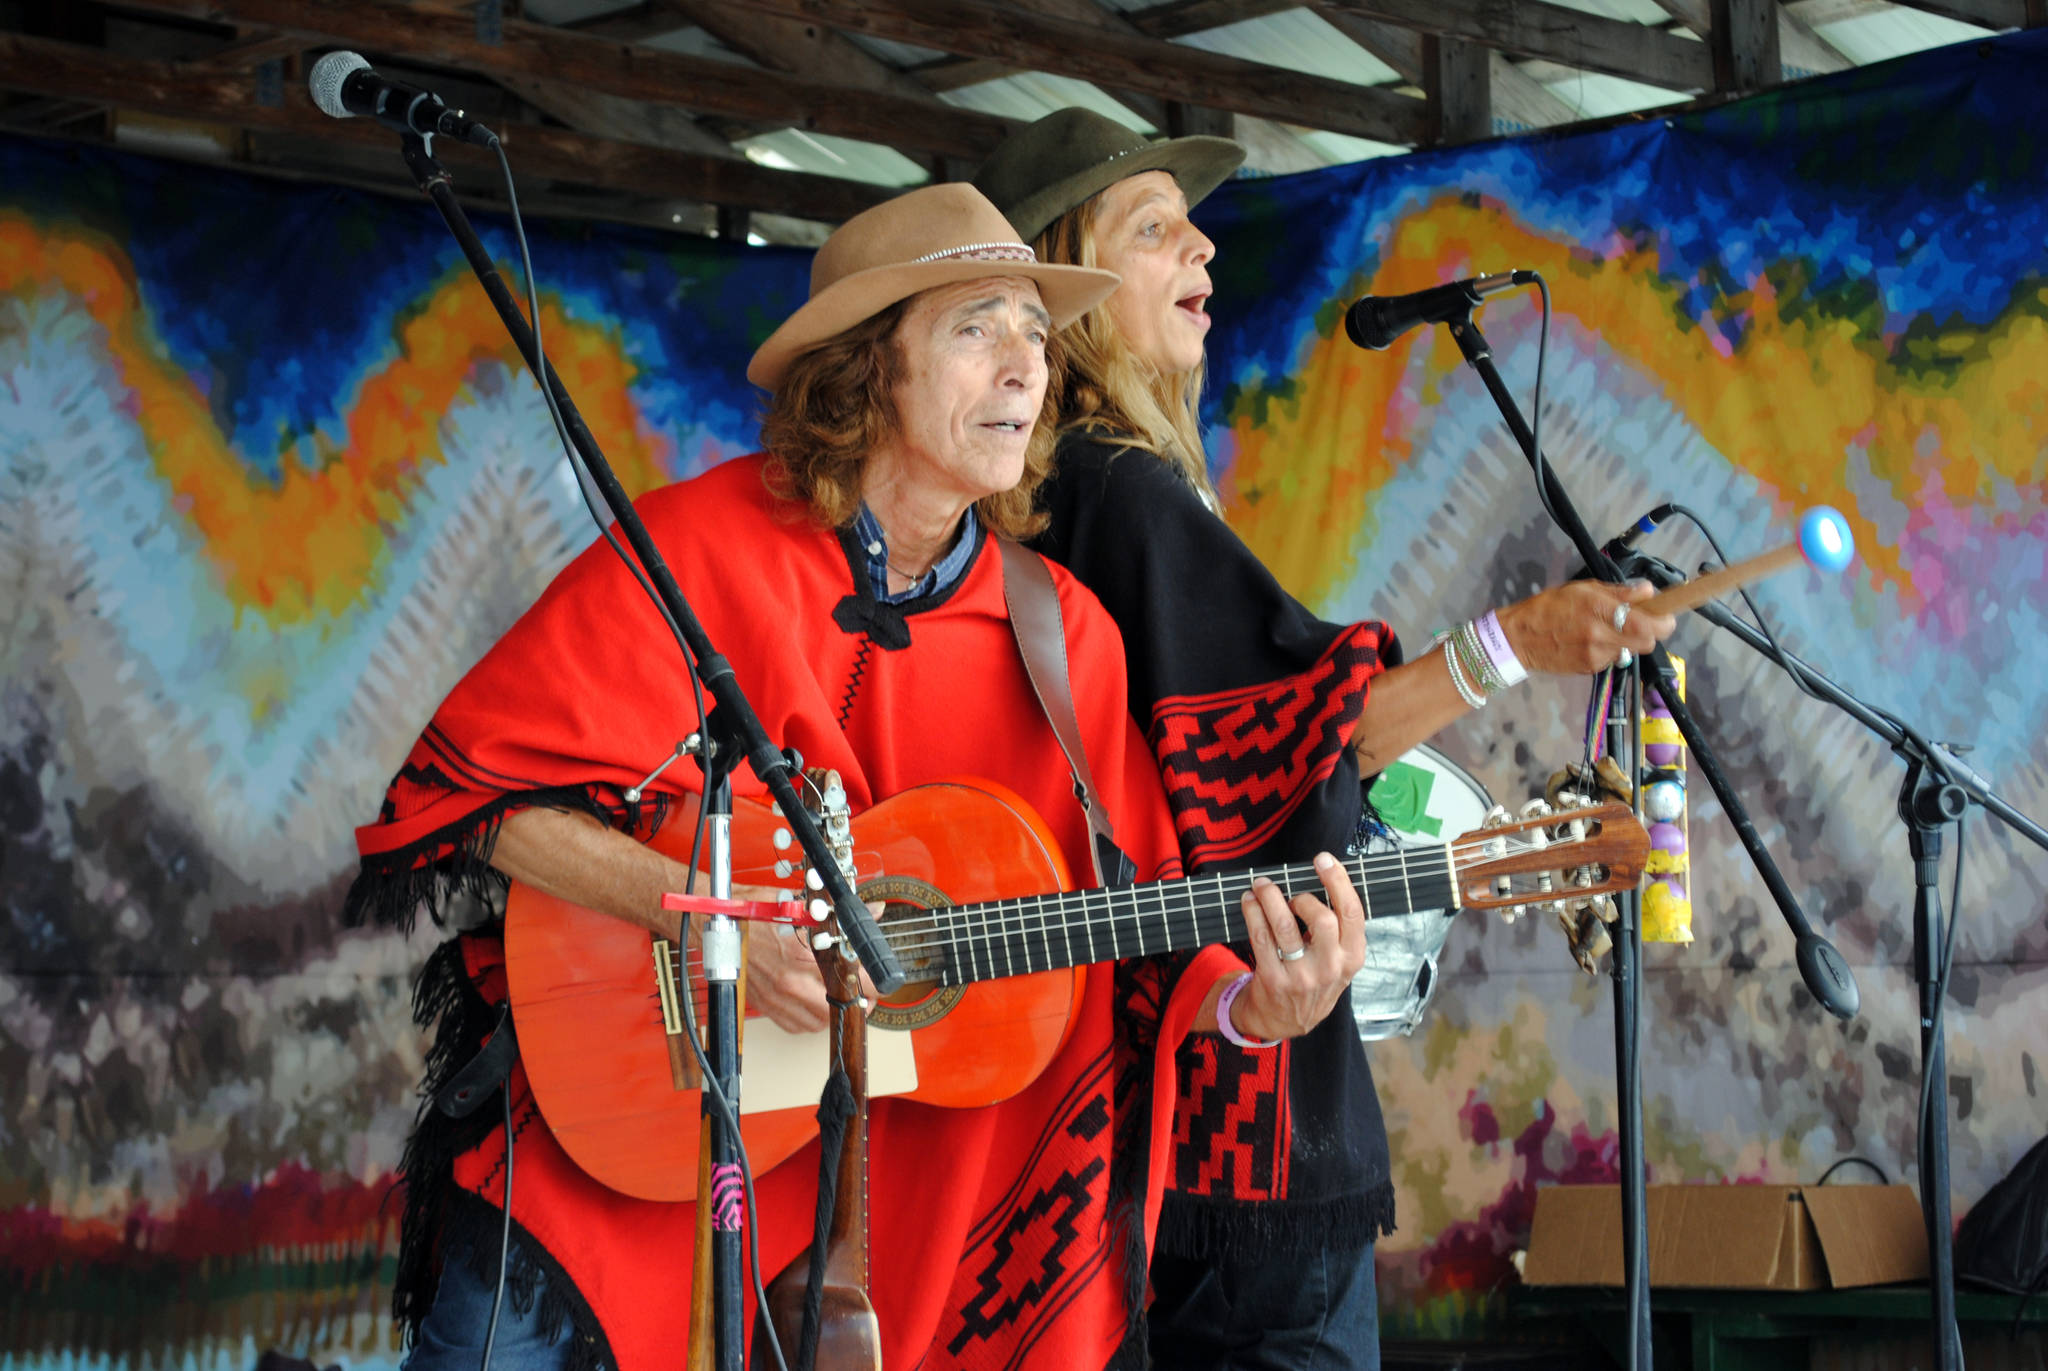 Musical duo Rio Samaya play on the River Stage during the 2017 Salmonfest in Ninilchik on Friday, Aug. 4. The three-day music festival concludes on Sunday night. (Photo by Kat Sorensen/Peninsula Clarion)